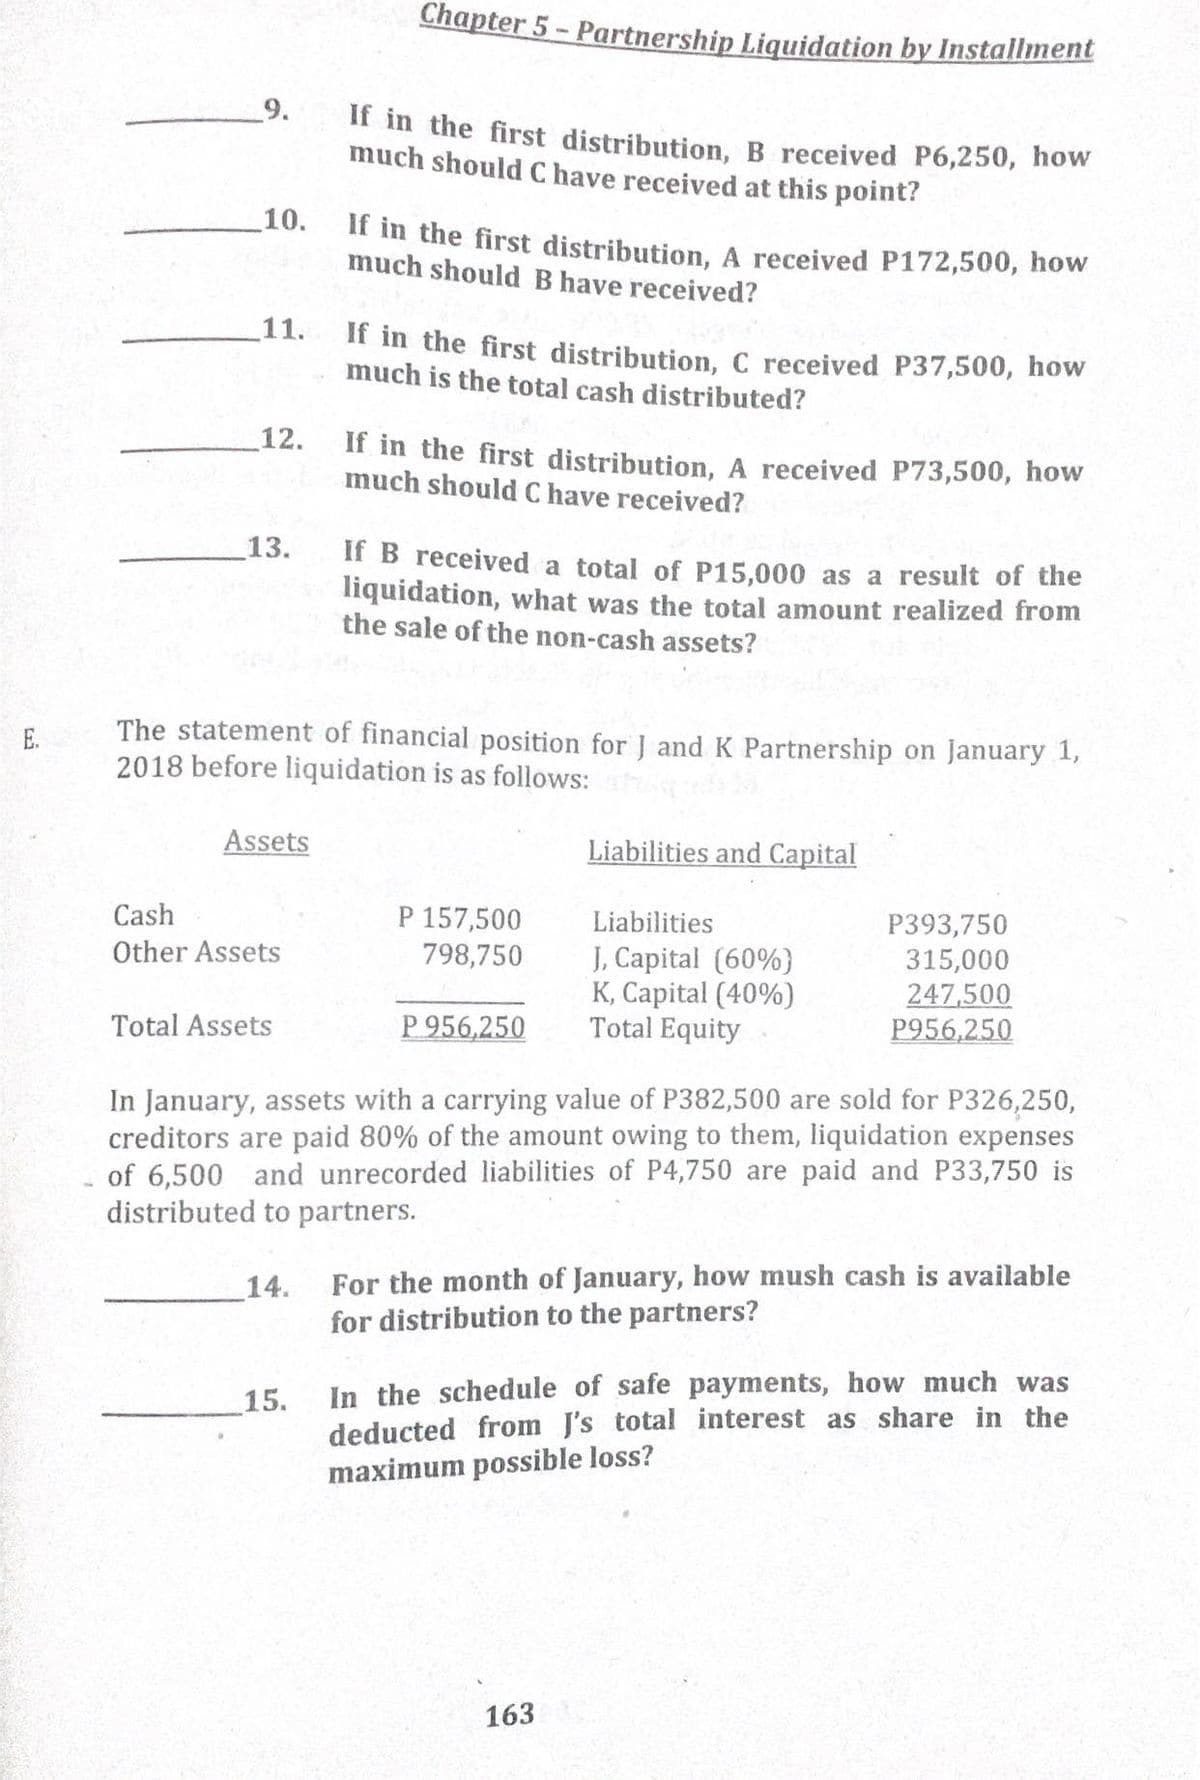 Chapter 5 - Partnership Liquidation by Installment
9.
If in the first distribution, B received P6,250, how
much should C have received at this point?
10.
If in the first distribution, A received P172,500, how
much should B have received?
11.
If in the first distribution, C received P37,500, how
much is the total cash distributed?
12.
If in the first distribution, A received P73,500, how
much should C have received?
13.
If B received a total of P15,000 as a result of the
liquidation, what was the total amount realized from
the sale of the non-cash assets?
The statement of financial position for J andK Partnership on January 1,
2018 before liquidation is as follows:
E.
Assets
Liabilities and Capital
P 157,500
798,750
Cash
Liabilities
P393,750
315,000
247,500
P956,250
Other Assets
J, Capital (60%}
K, Capital (40%)
Total Equity
Total Assets
P 956,250
In January, assets with a carrying value of P382,500 are sold for P326,250,
creditors are paid 80% of the amount owing to them, liquidation expenses
of 6,500 and unrecorded liabilities of P4,750 are paid and P33,750 is
distributed to partners.
For the month of January, how mush cash is available
for distribution to the partners?
14.
In the schedule of safe payments, how much was
deducted from J's total interest as share in the
maximum possible loss?
15.
163
